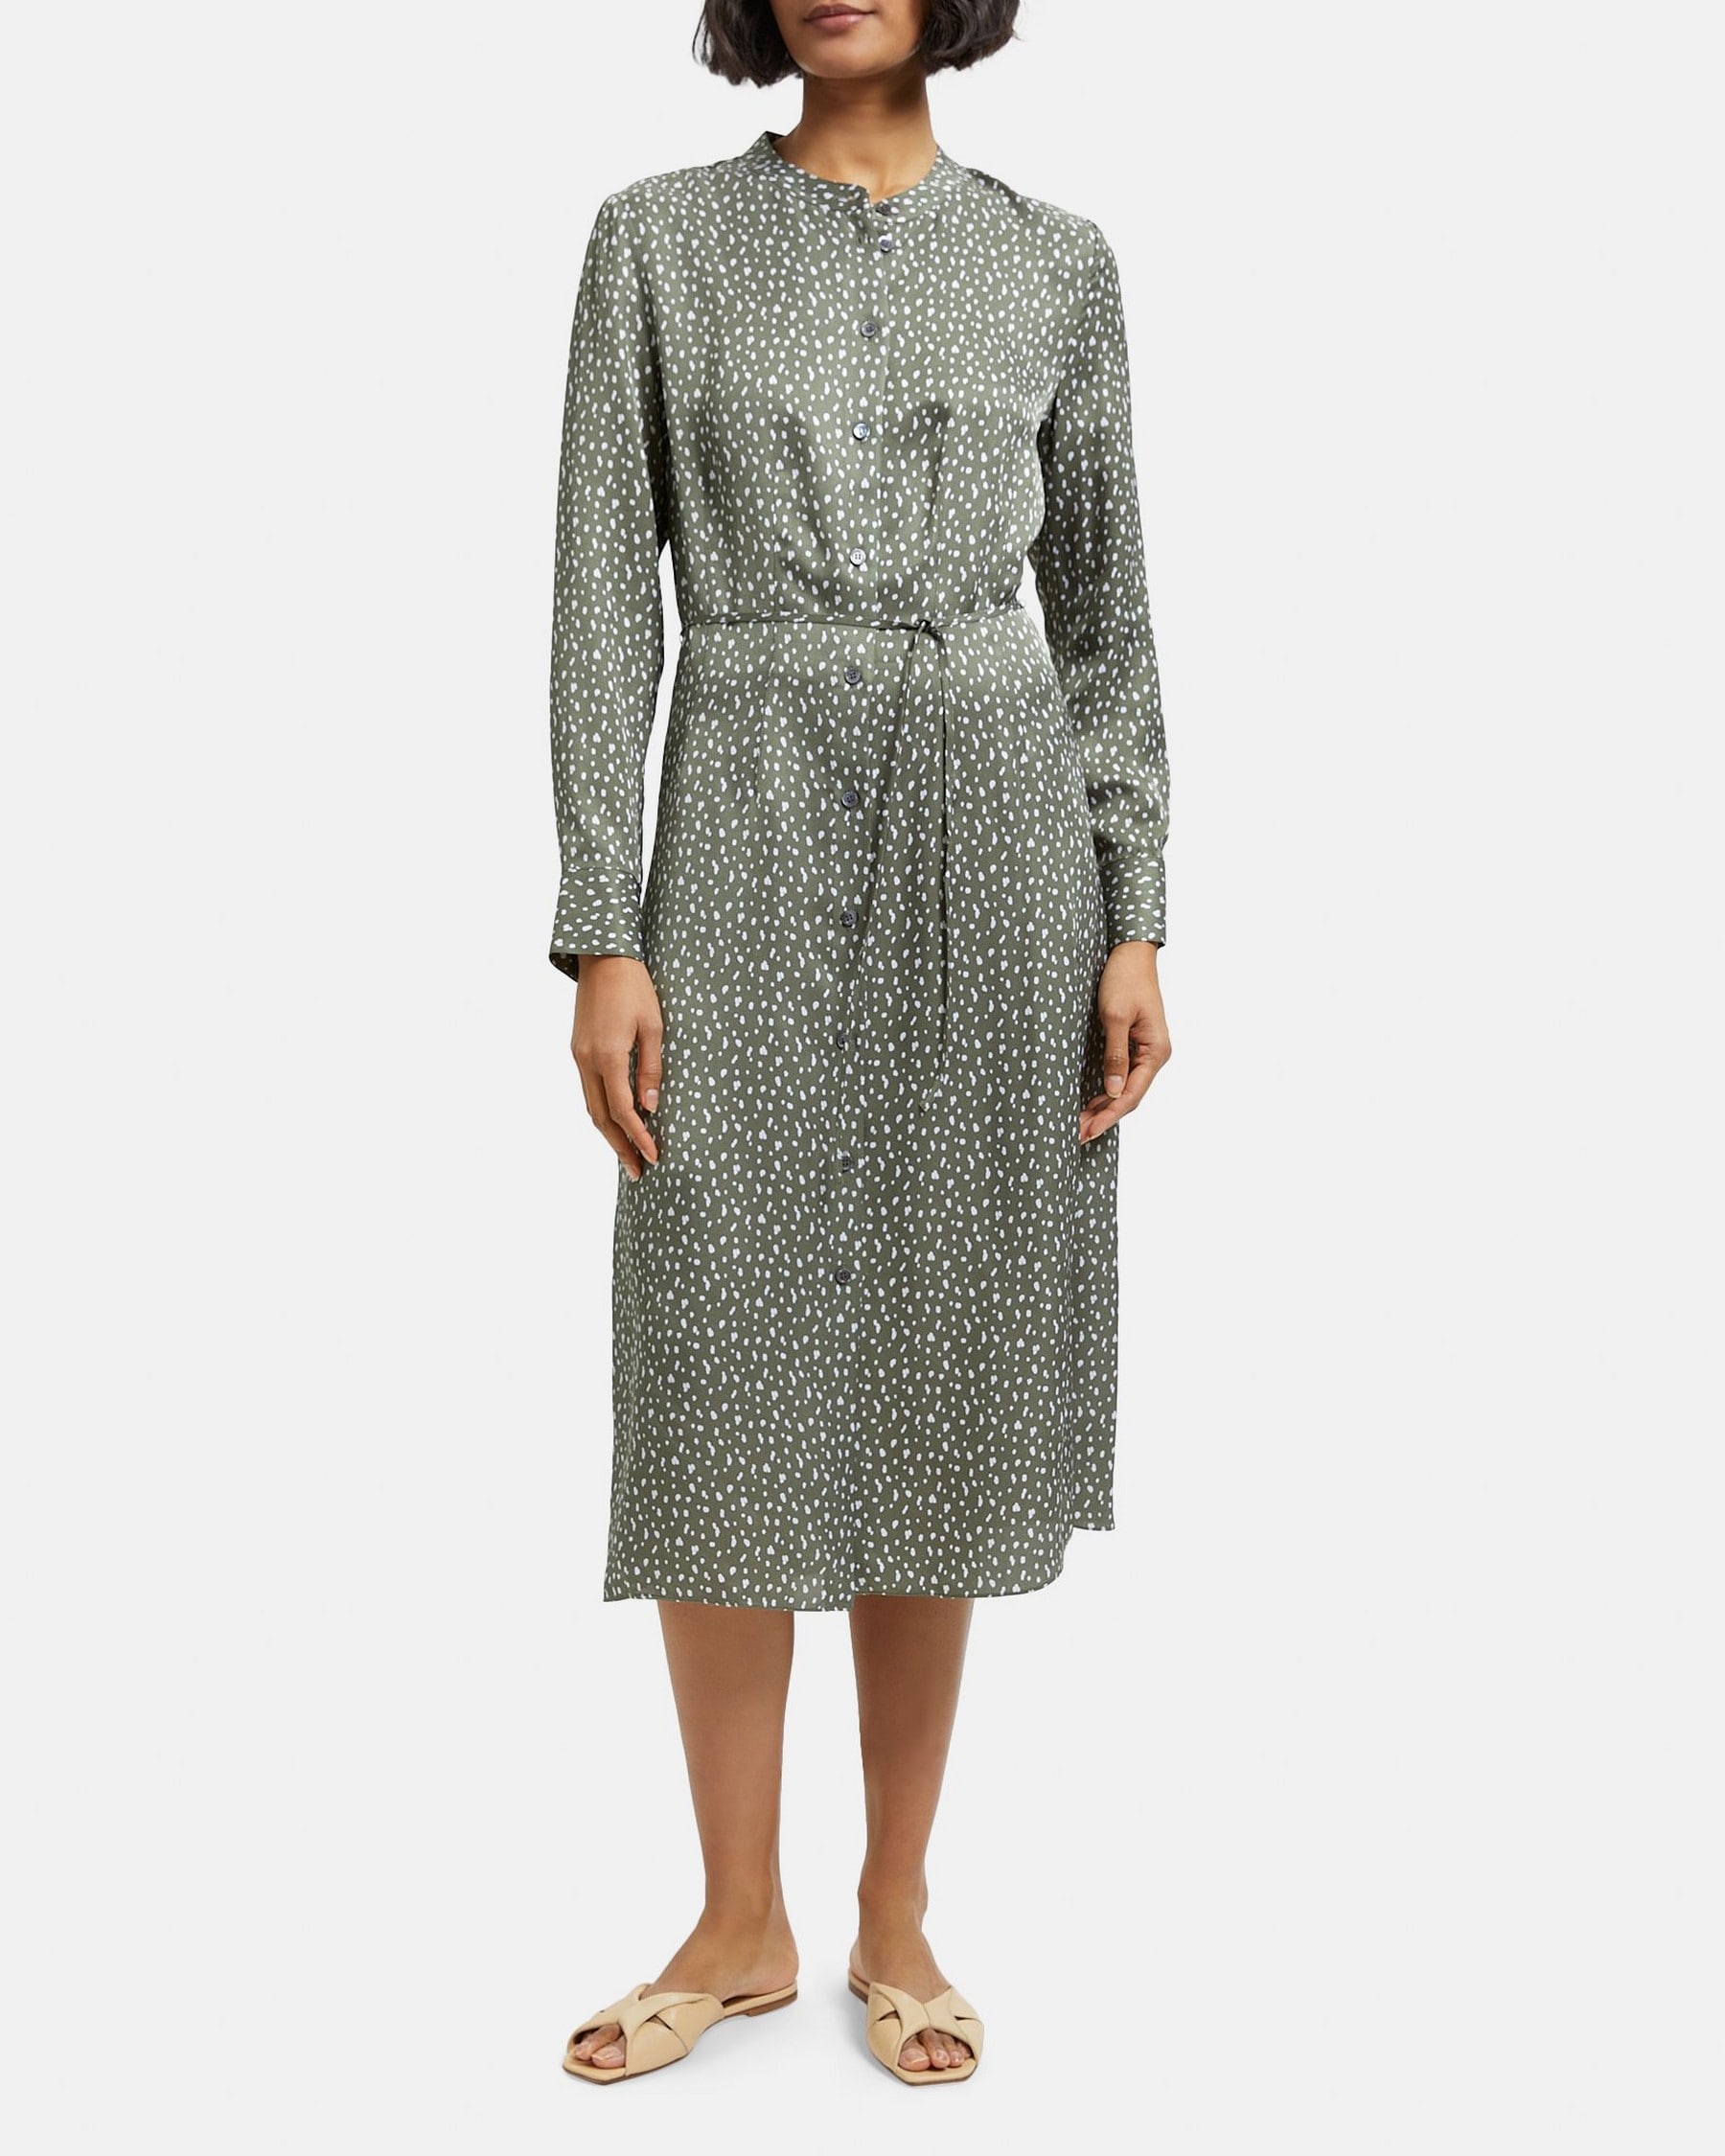 Theory Shirt Dress in Dotted Crepe